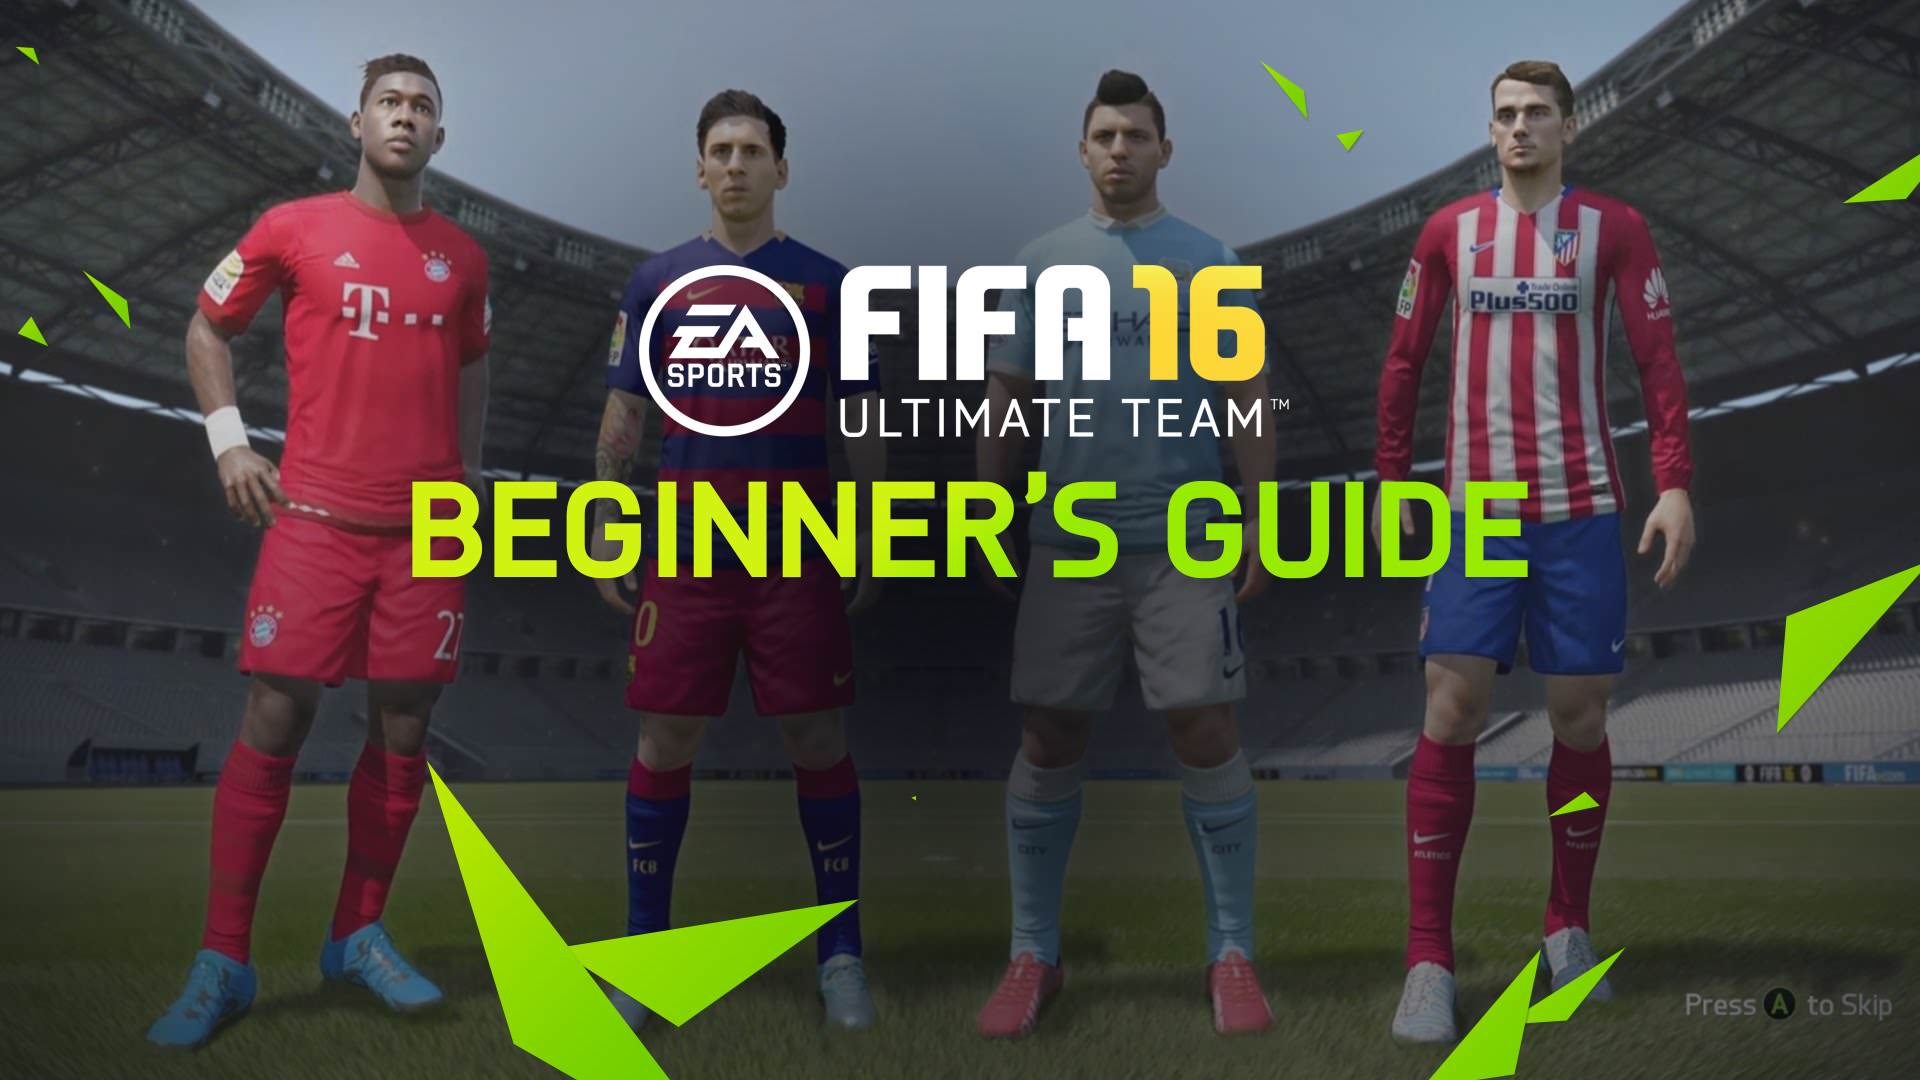 FIFA 16 Ultimate Team - Guide for Beginners